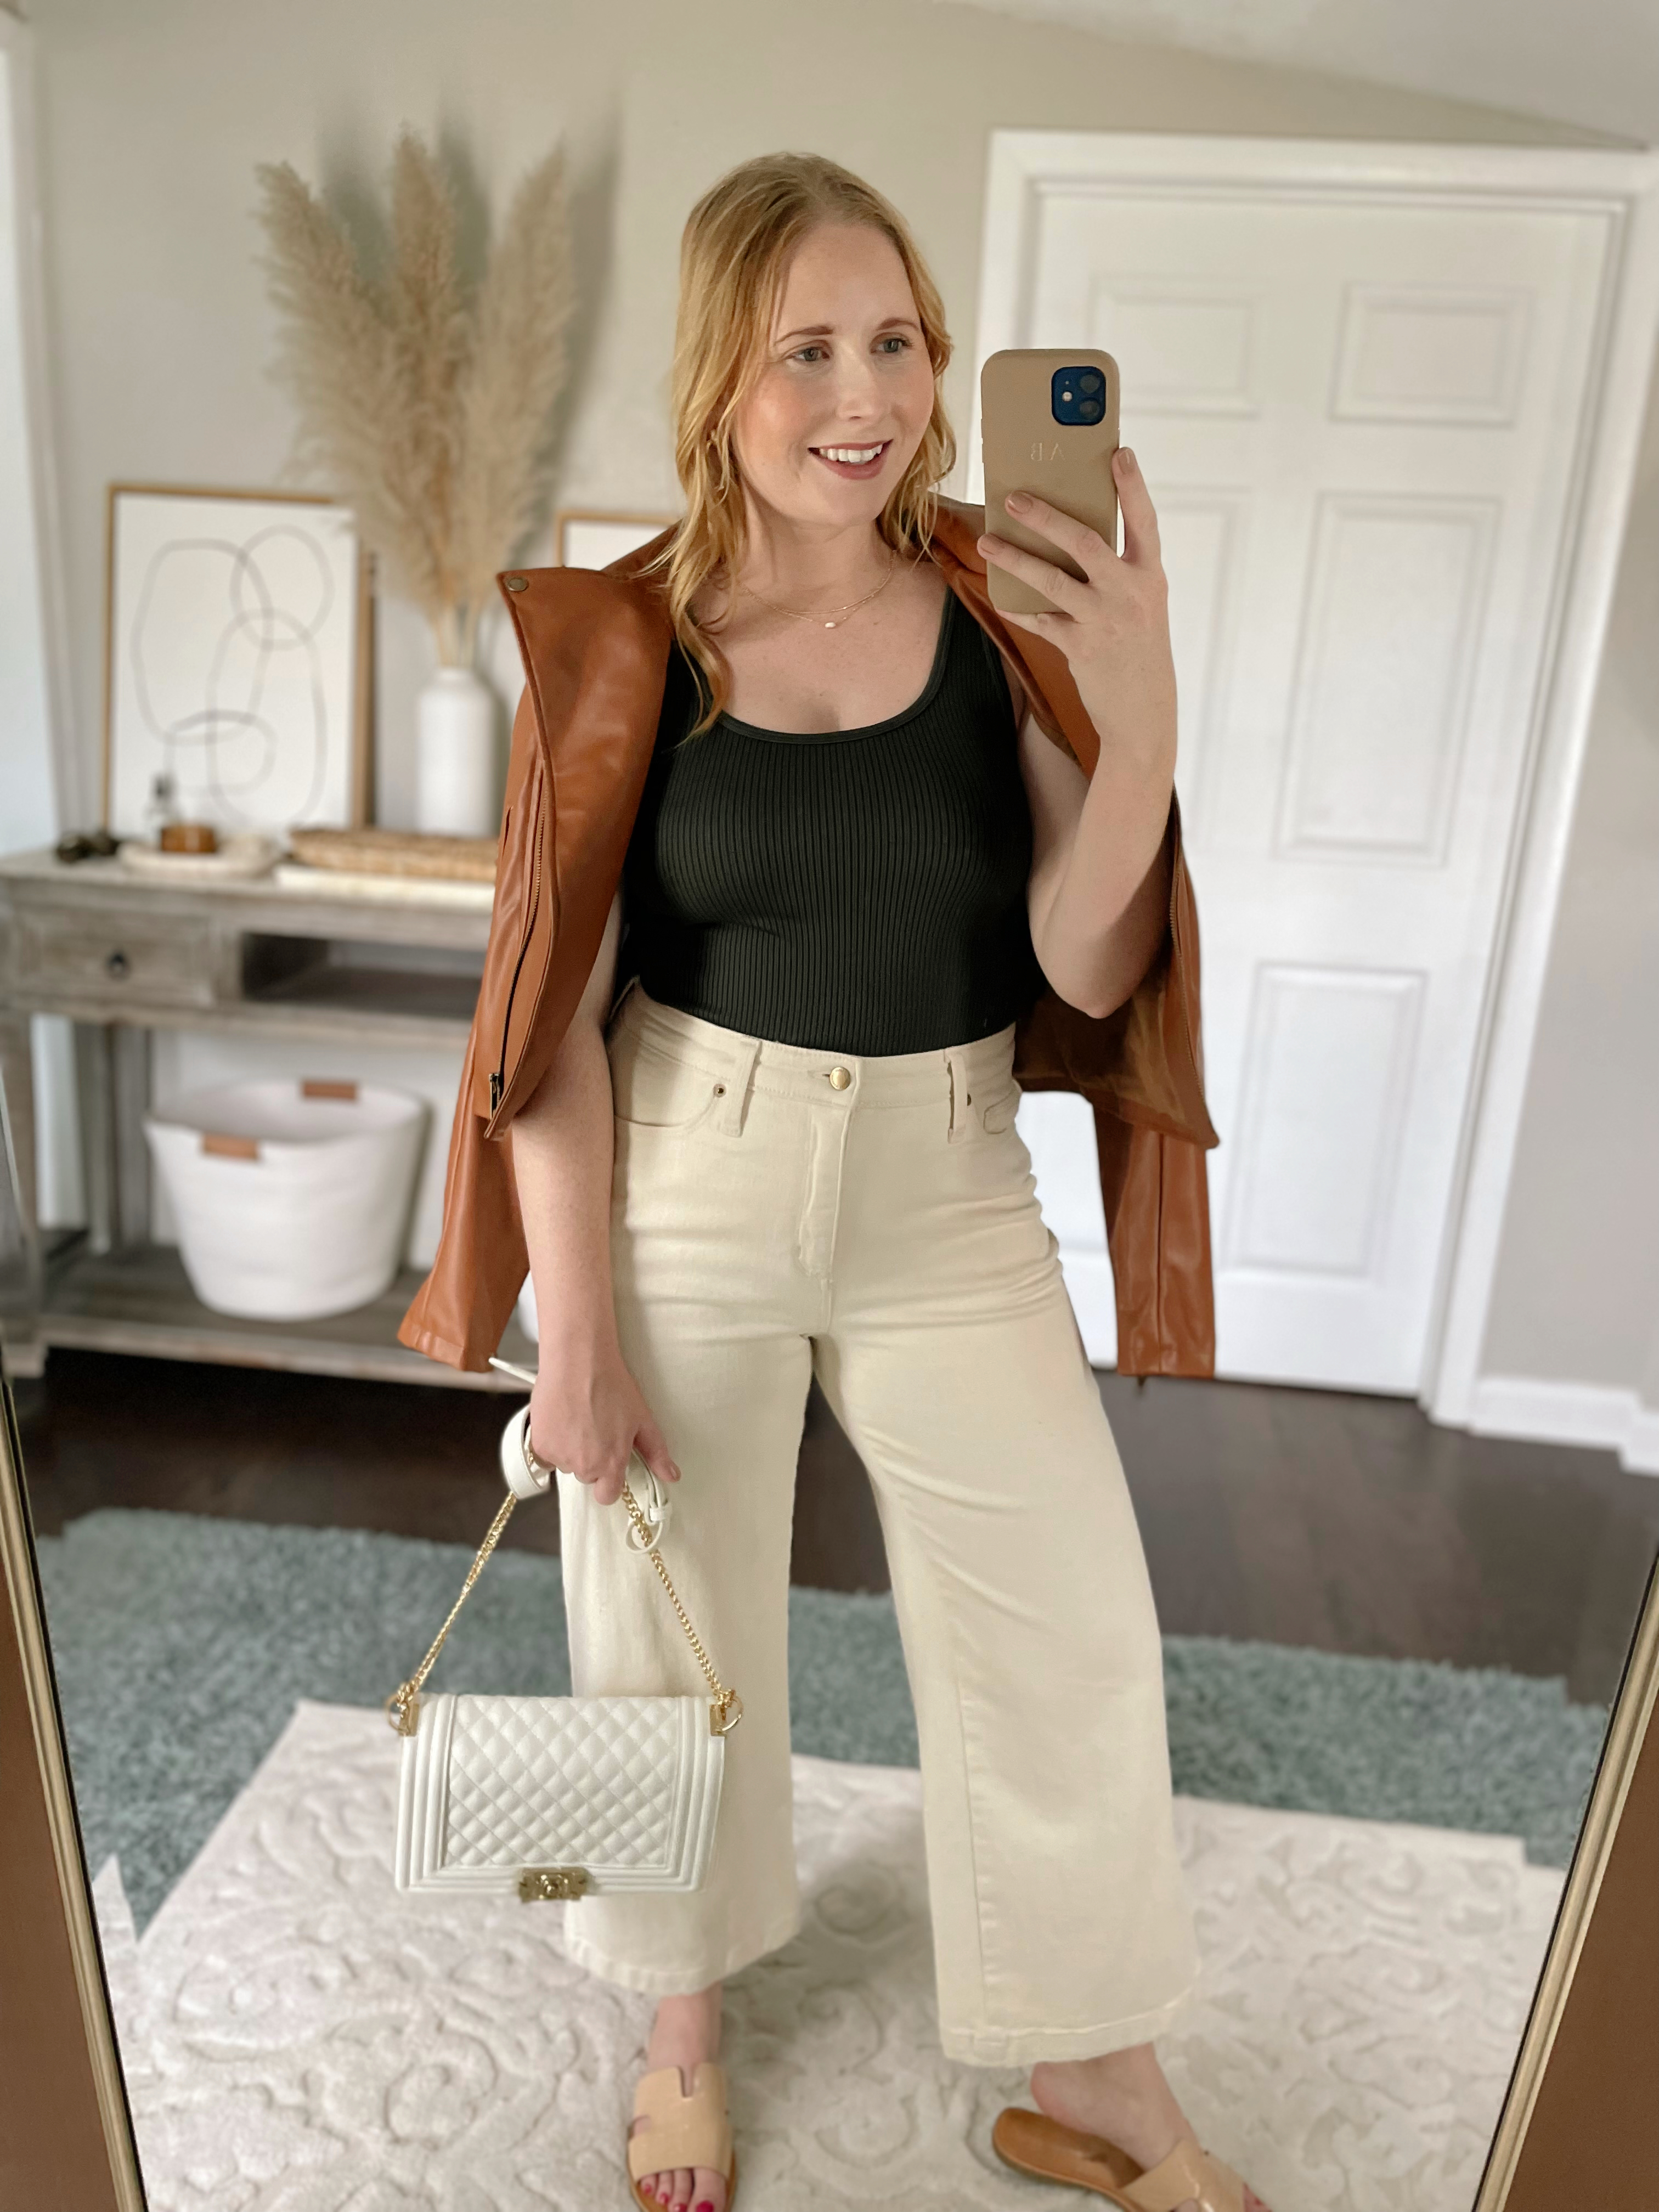 Affordable by Amanda wears a green ribbed tank top, brown faux leather moto jacket, cream wide leg pants while holding a white quilted bag